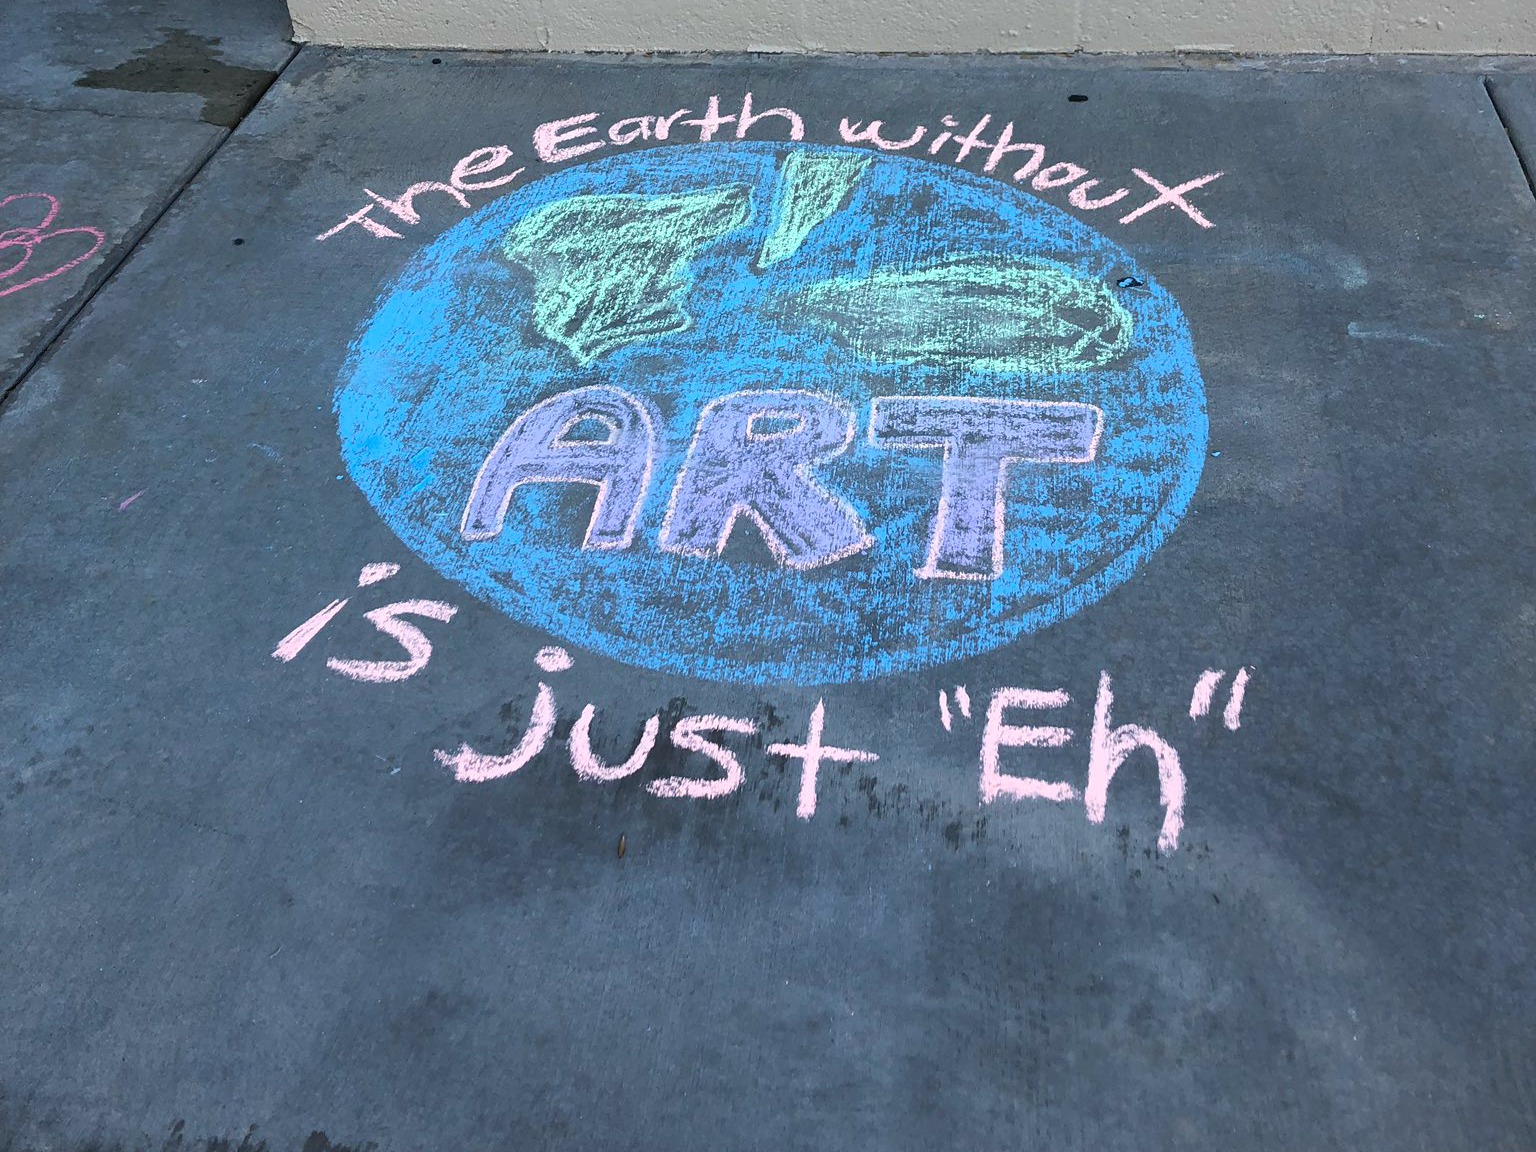 Chalk drawing that says, "The Earth without ART is just "eh."